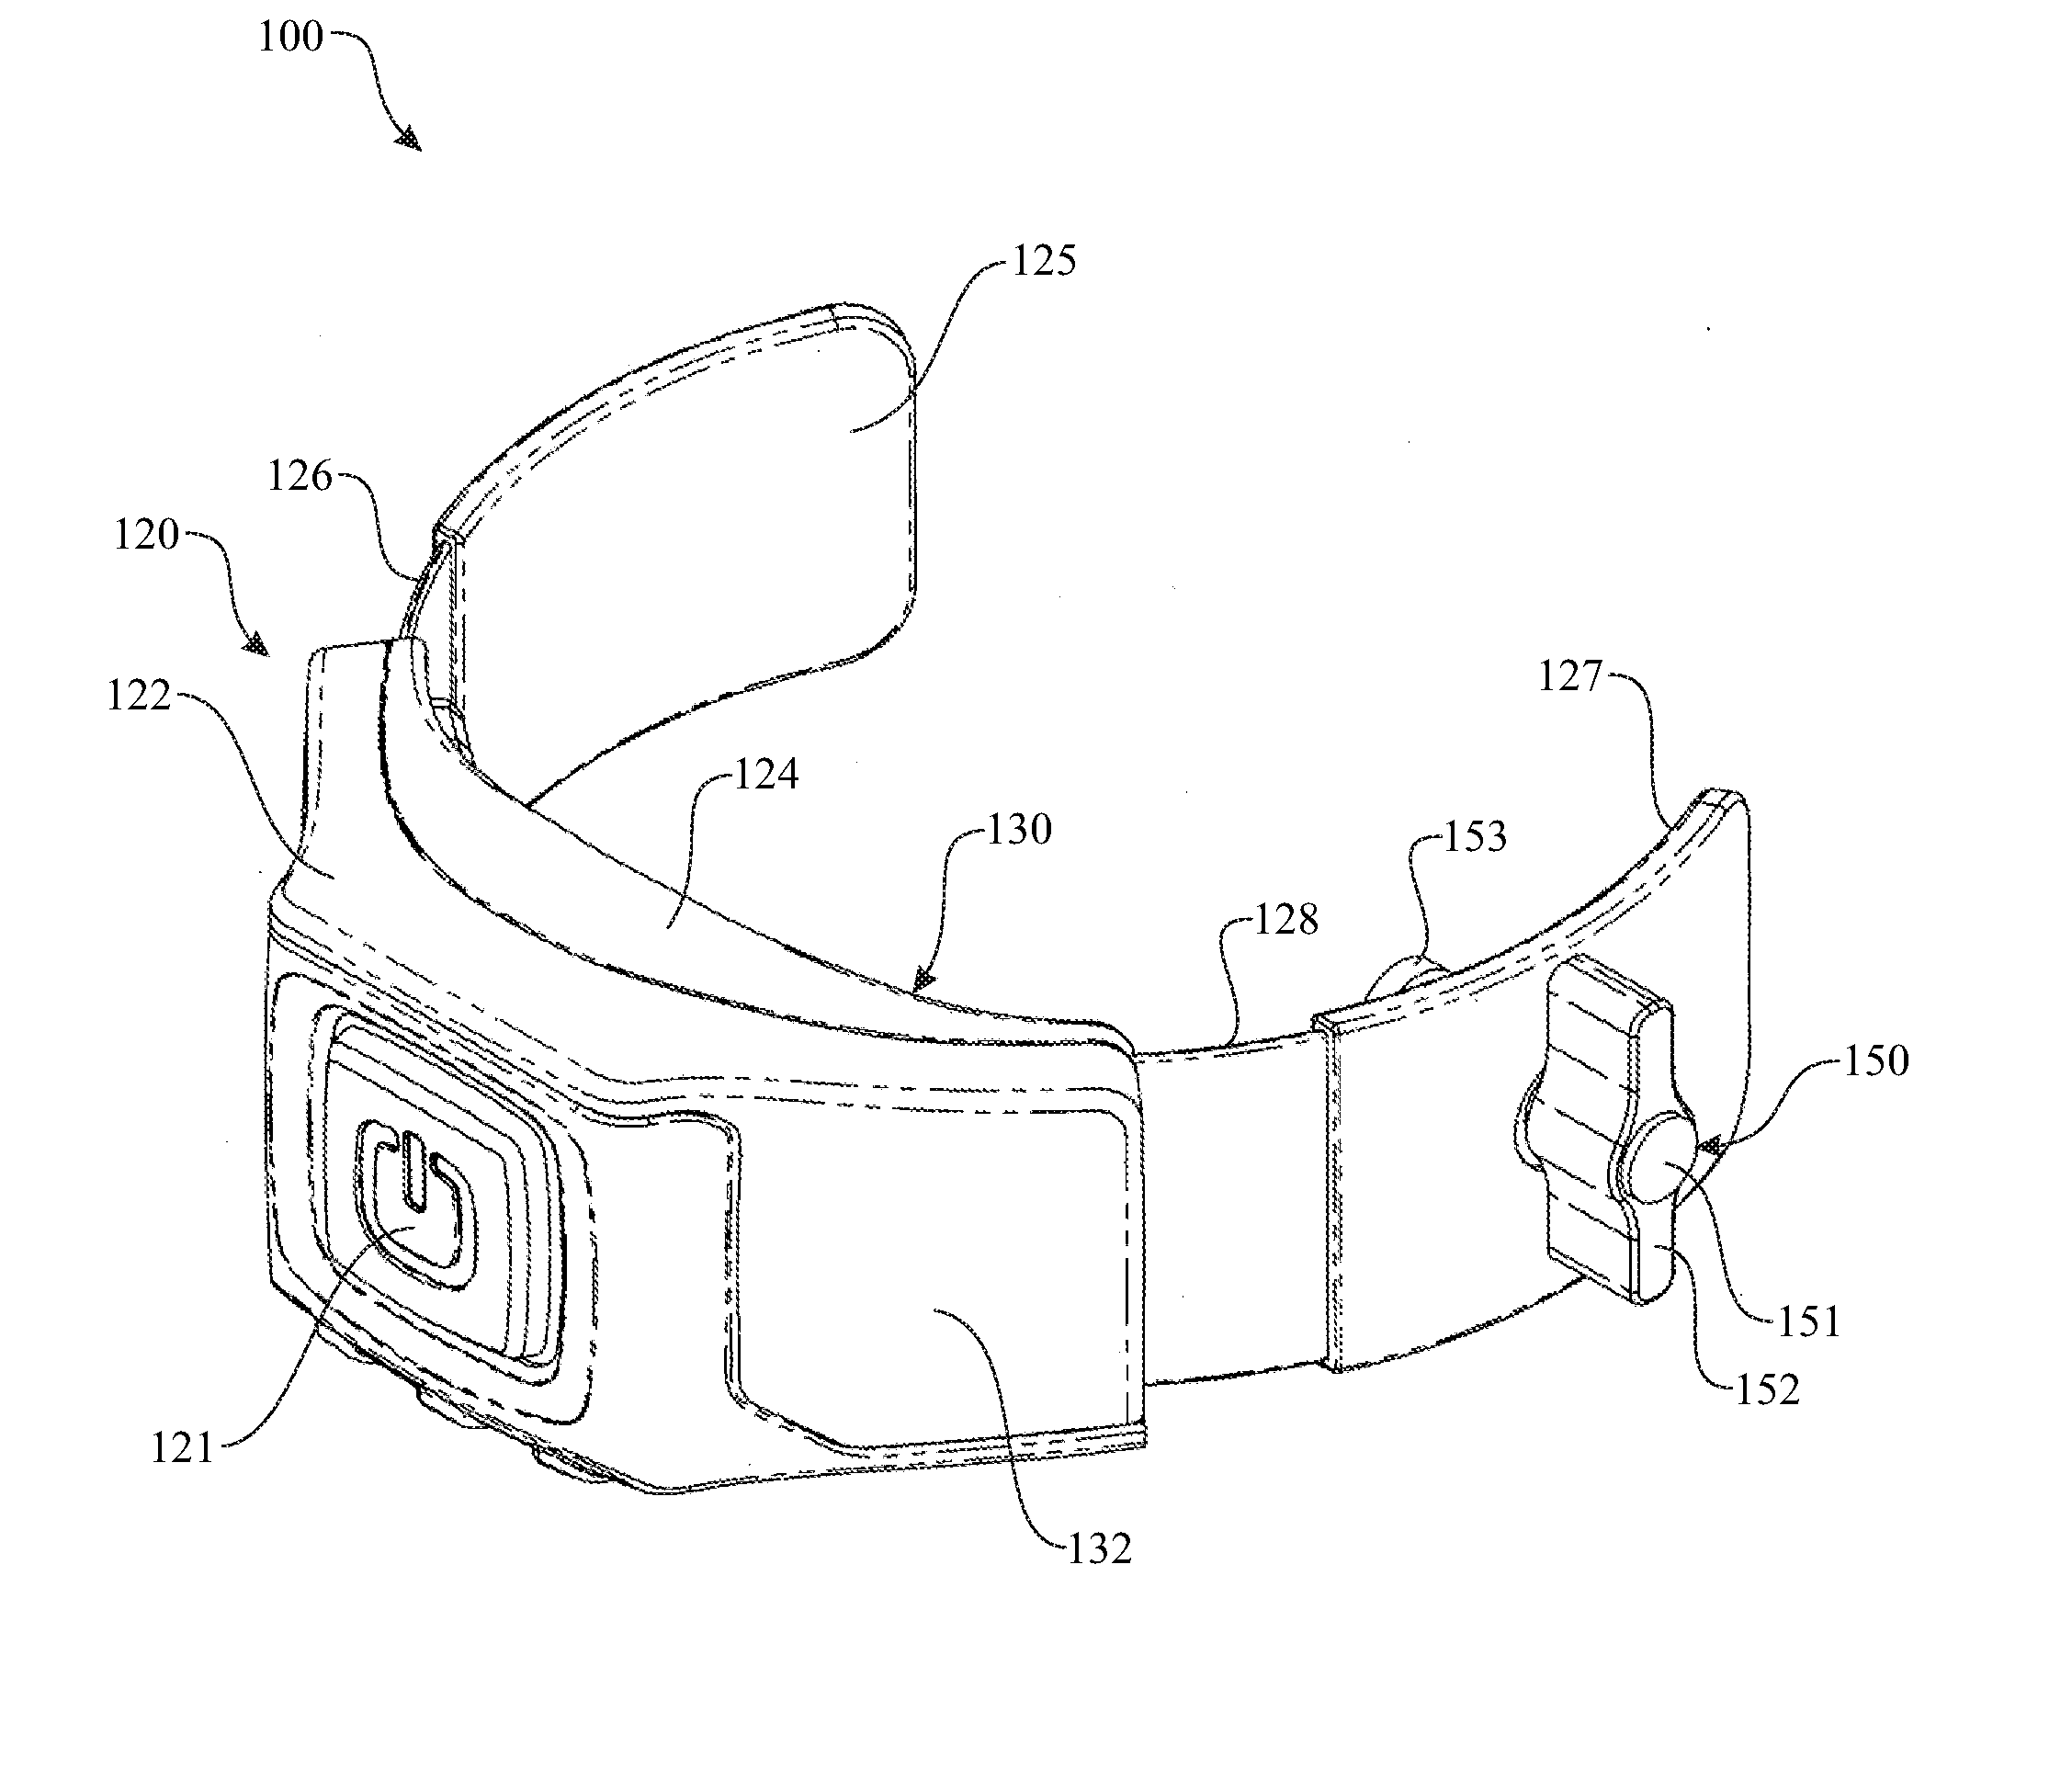 Audio signal amplification apparatus and method of use